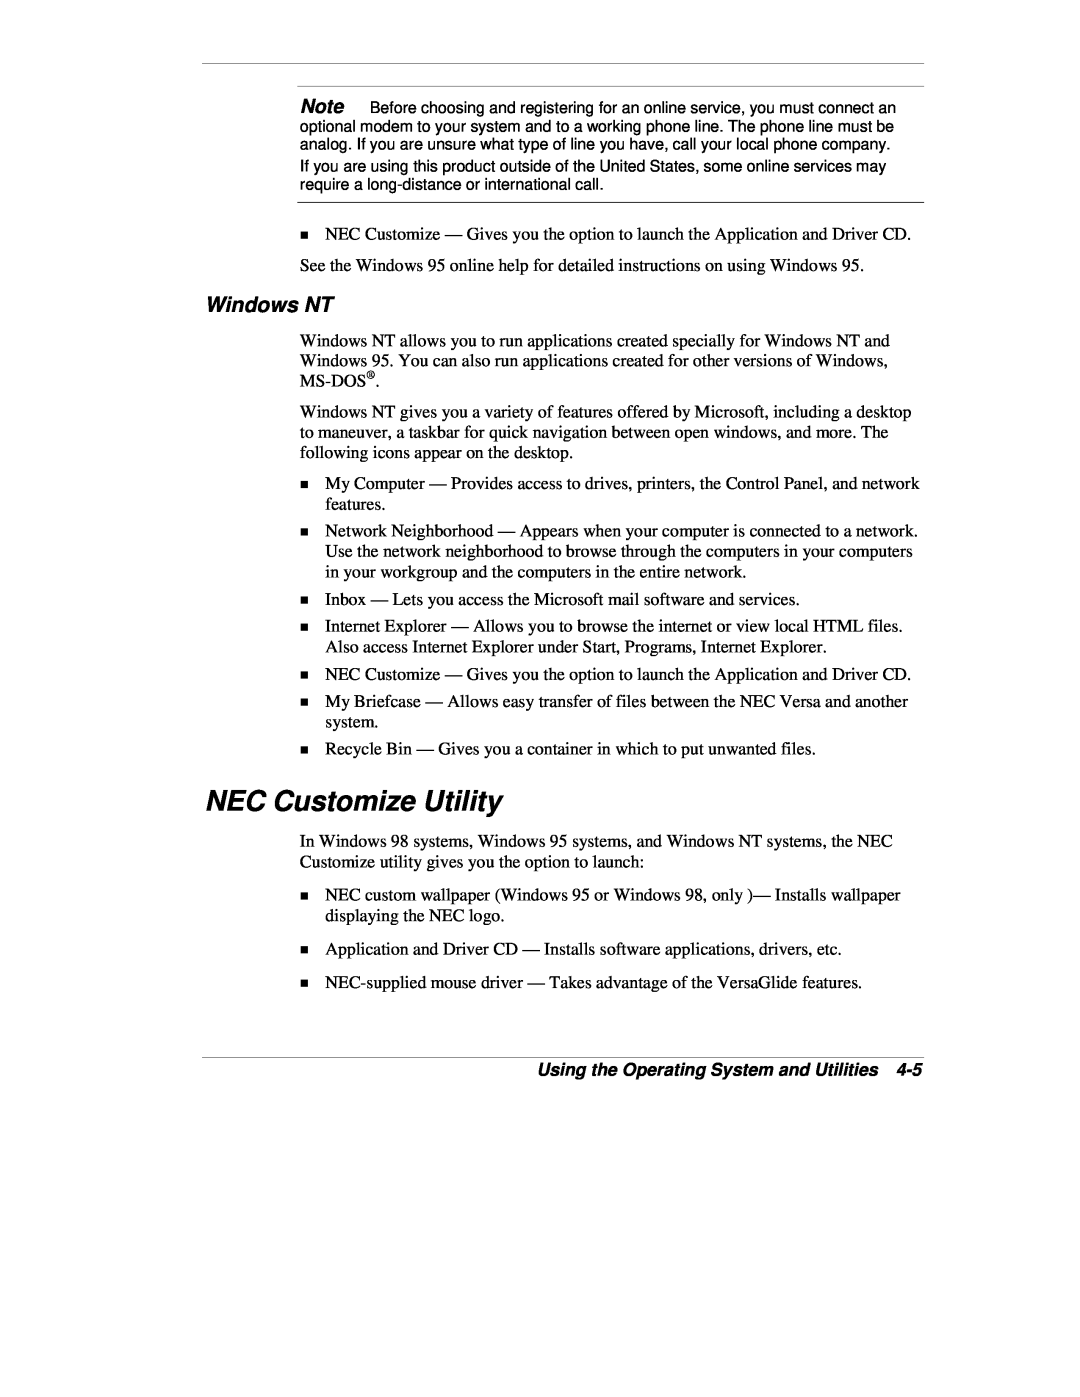 NEC VX manual NEC Customize Utility, Windows NT, Using the Operating System and Utilities 